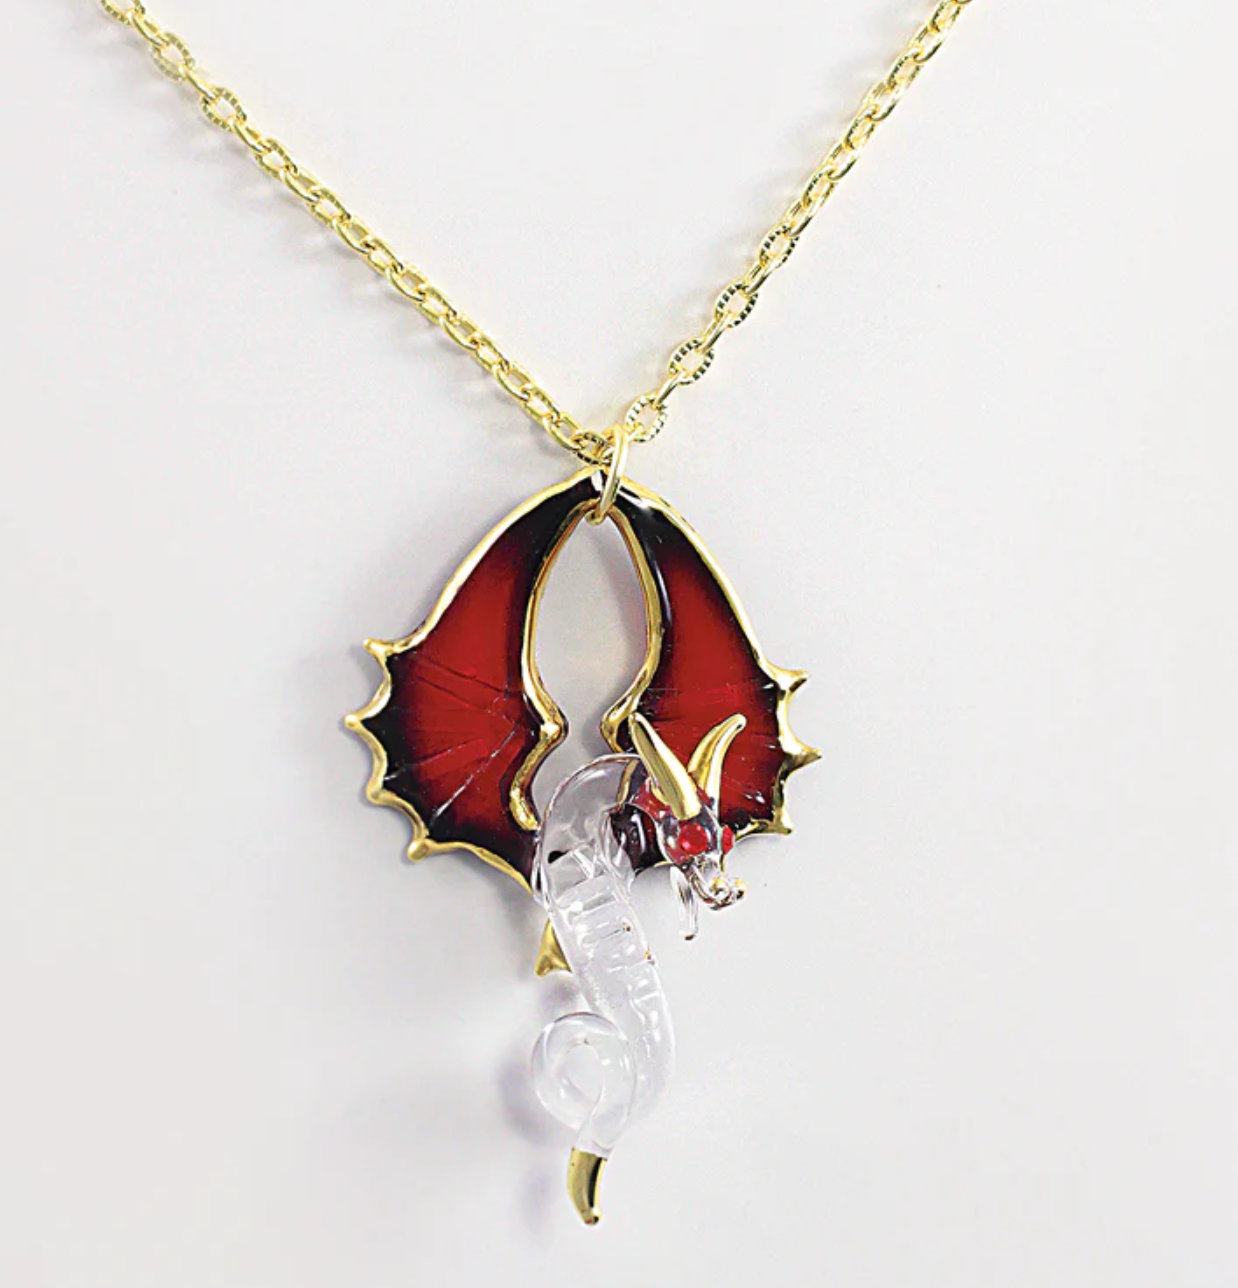 Dragon Necklace, Fantasy Necklace, Dragon Jewelry, Gold Dragon Pendant, Goth Necklace, Medieval Jewelry, Handcrafted Jewelry Necklace